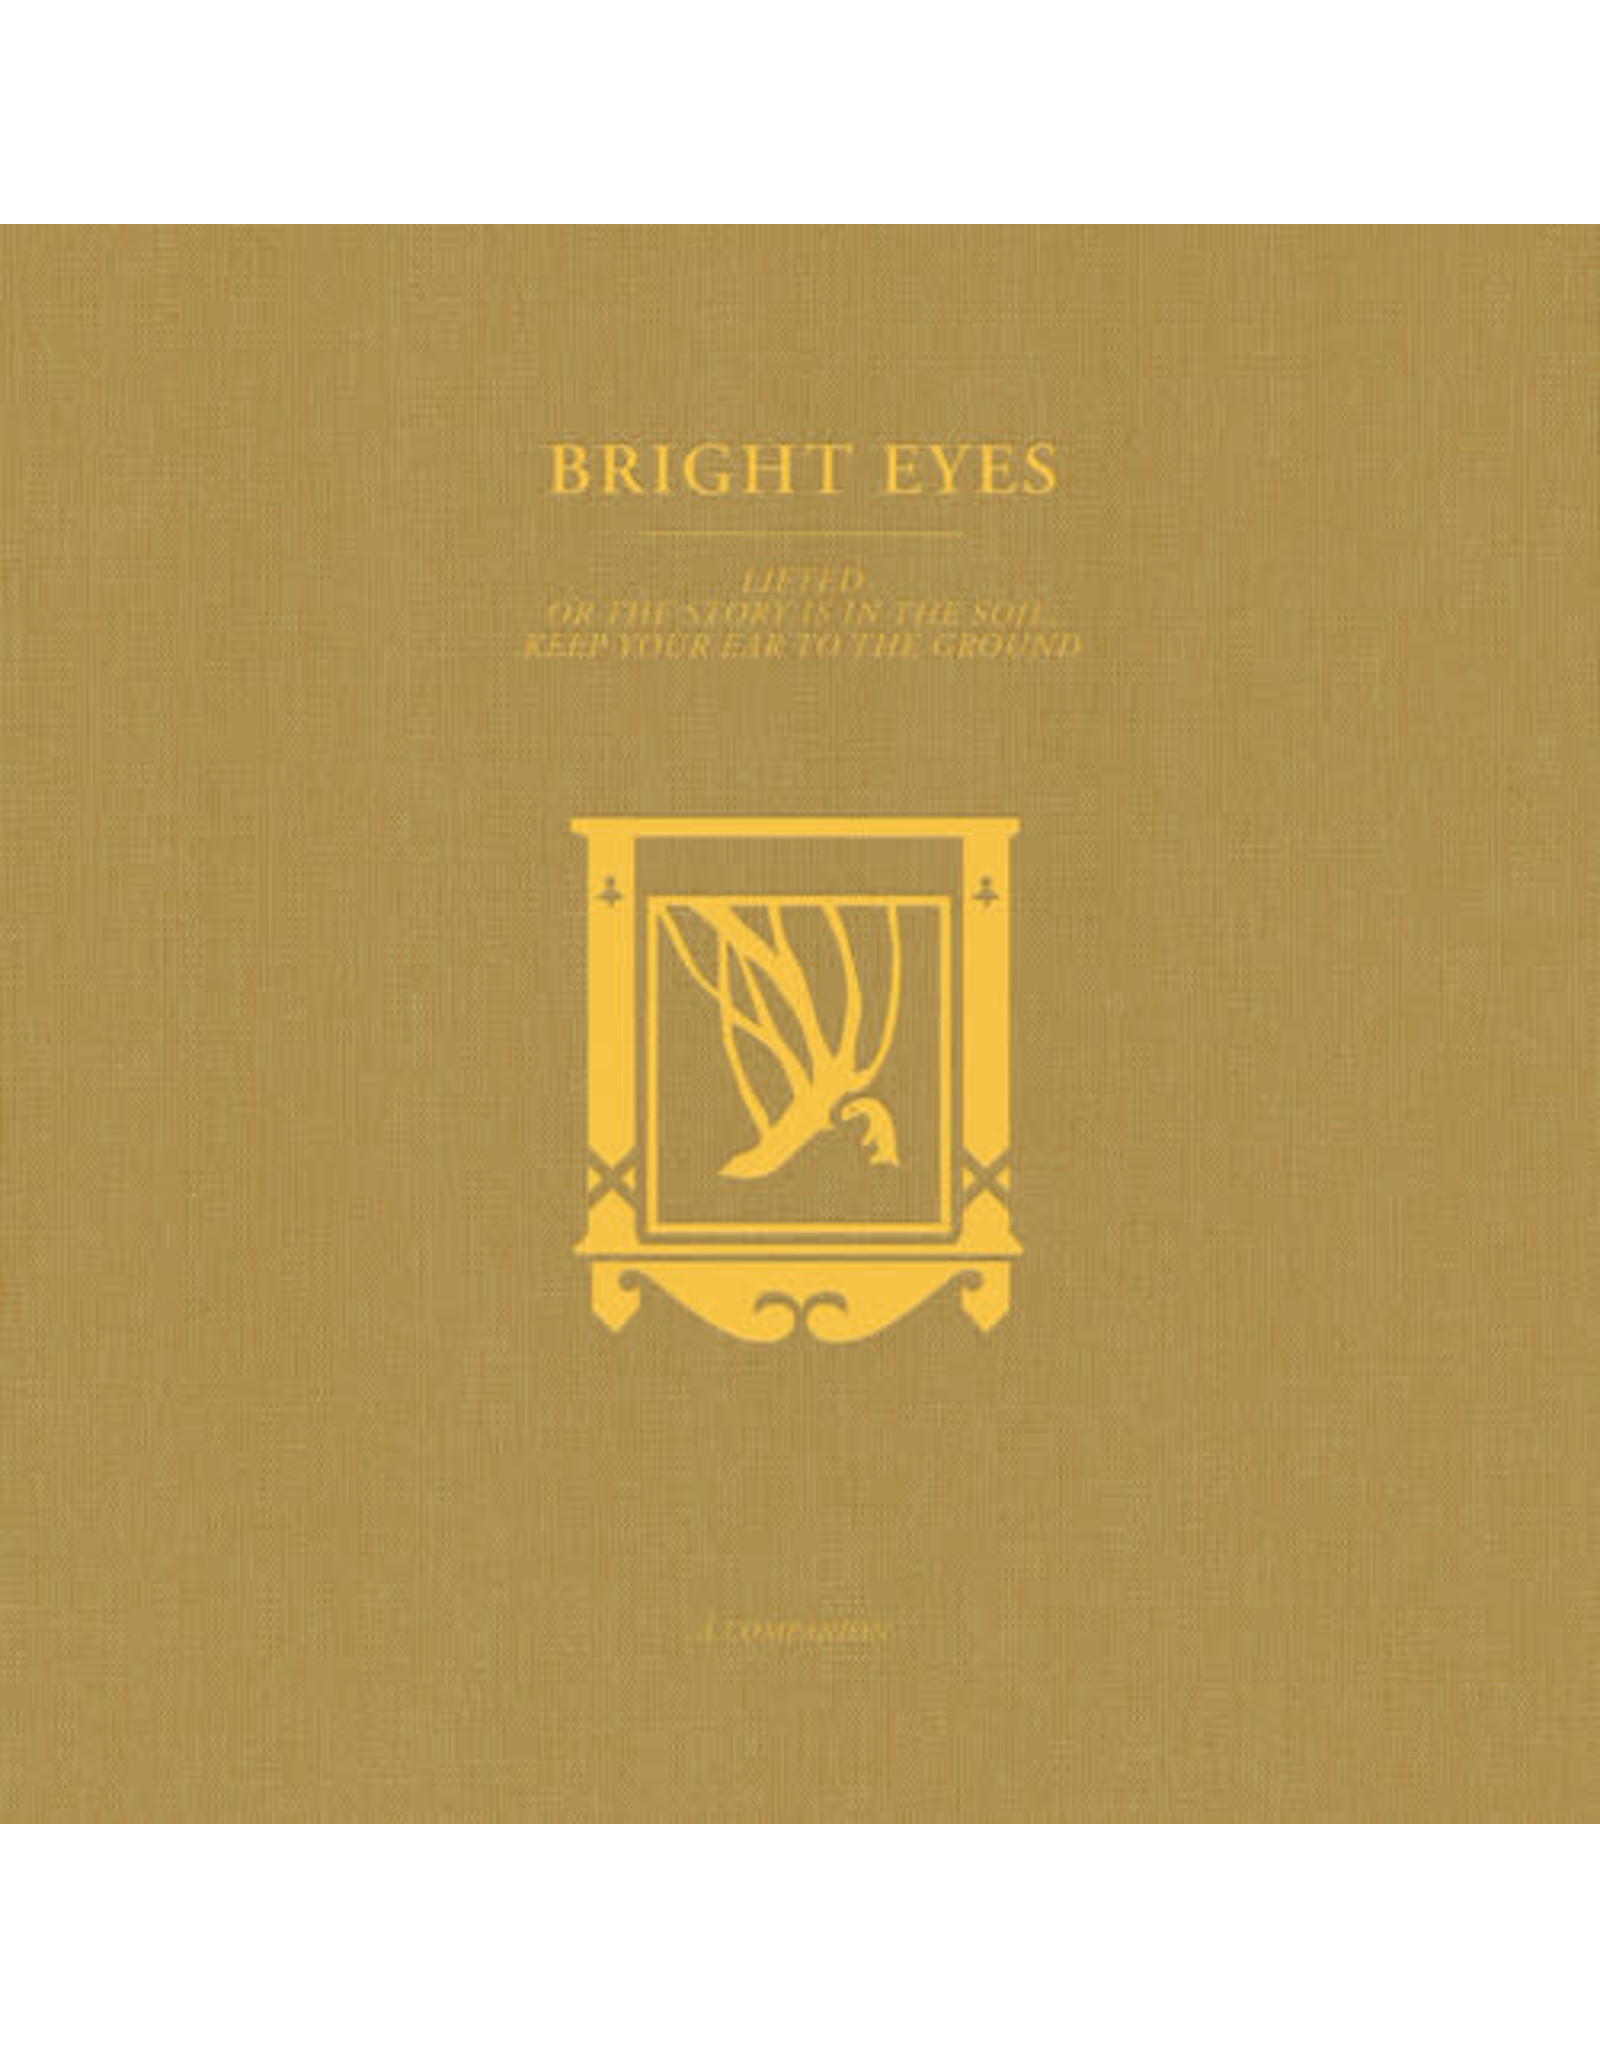 New Vinyl Bright Eyes - LIFTED or The Story Is in the Soil, Keep Your Ear to the Ground: A Companion (Extended Play, Gold) 12"